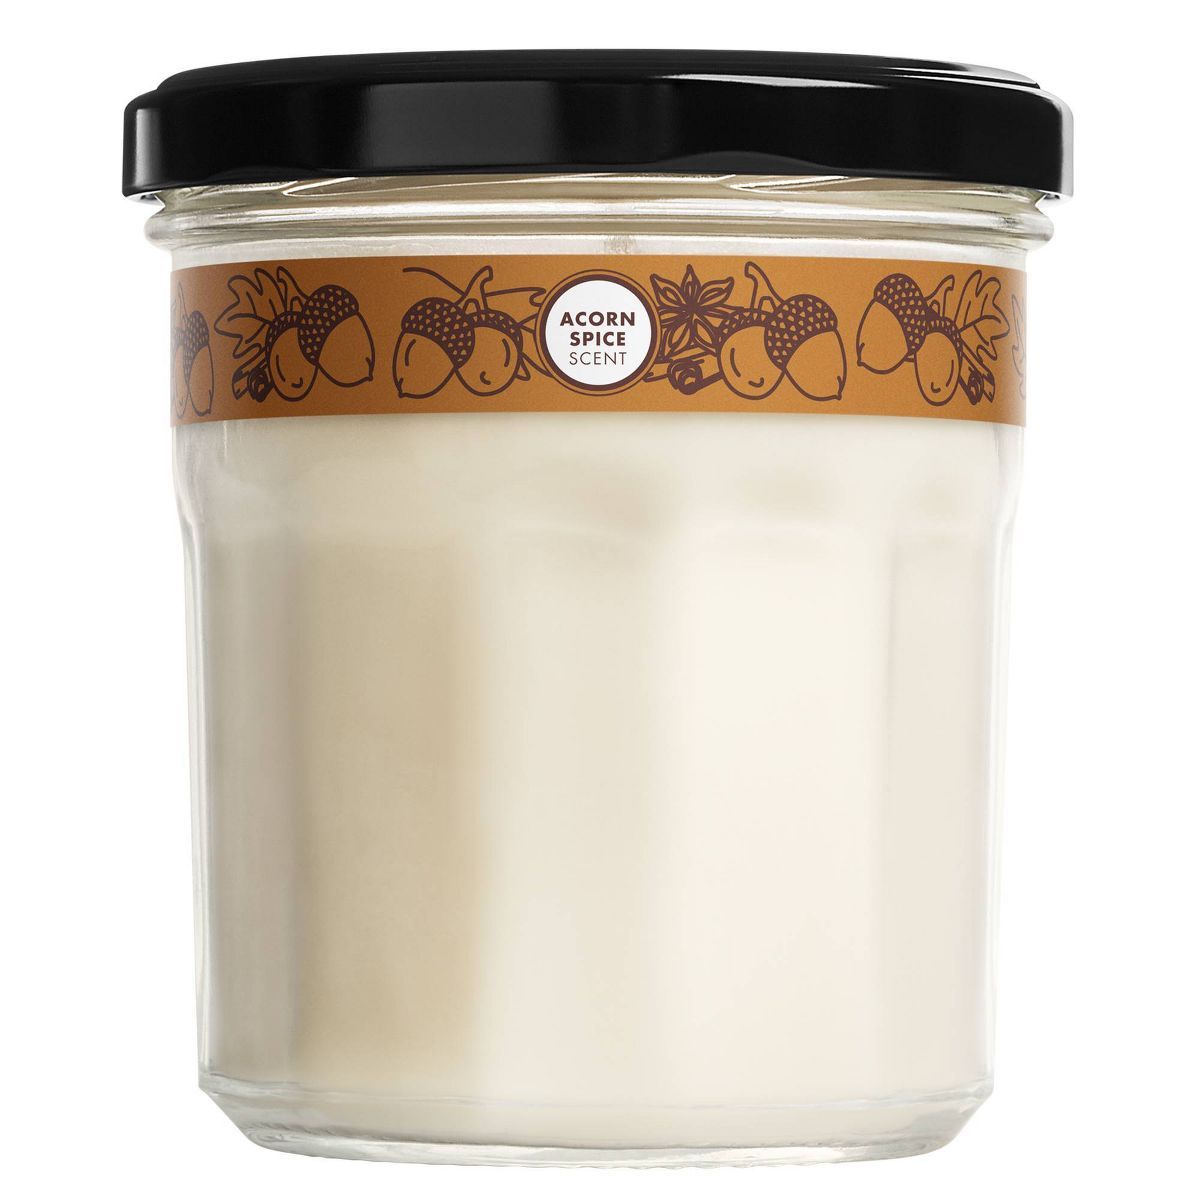 Mrs. Meyer's Clean Day Large Soy Candle - Acorn Spice - 7.2oz | Target